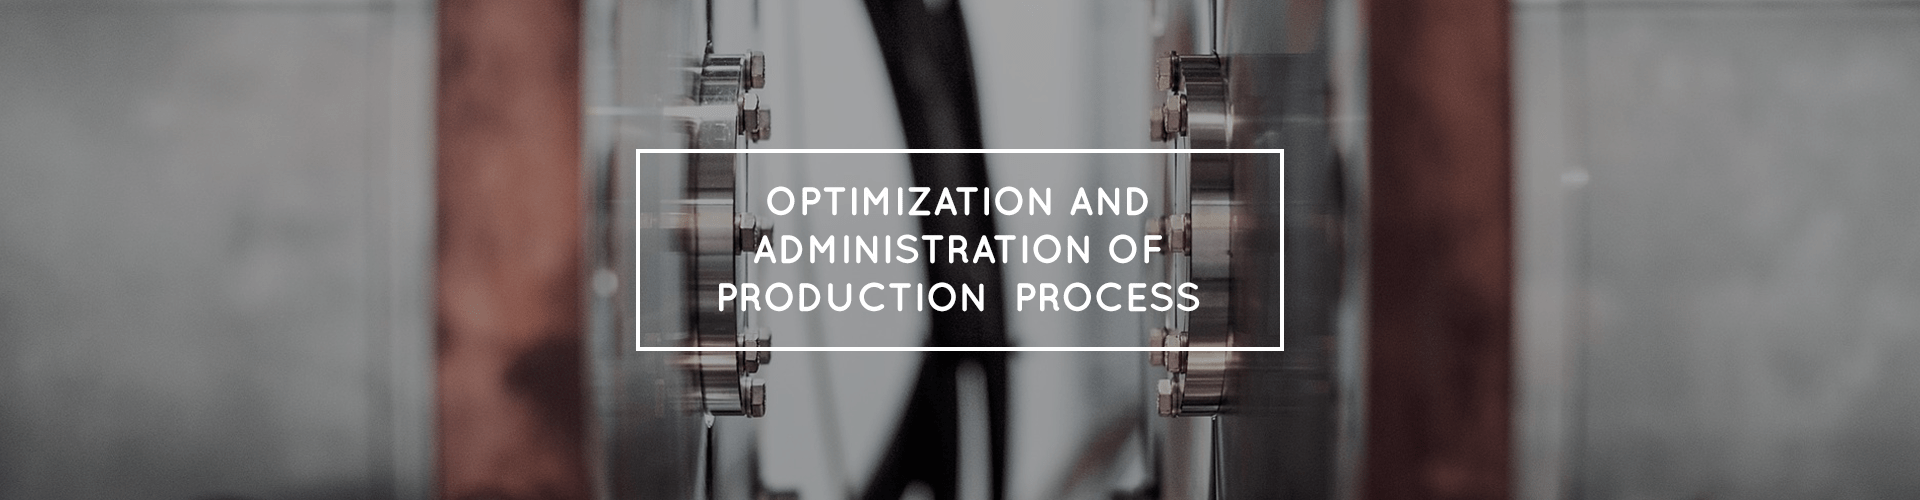 optimization and administration of us production process